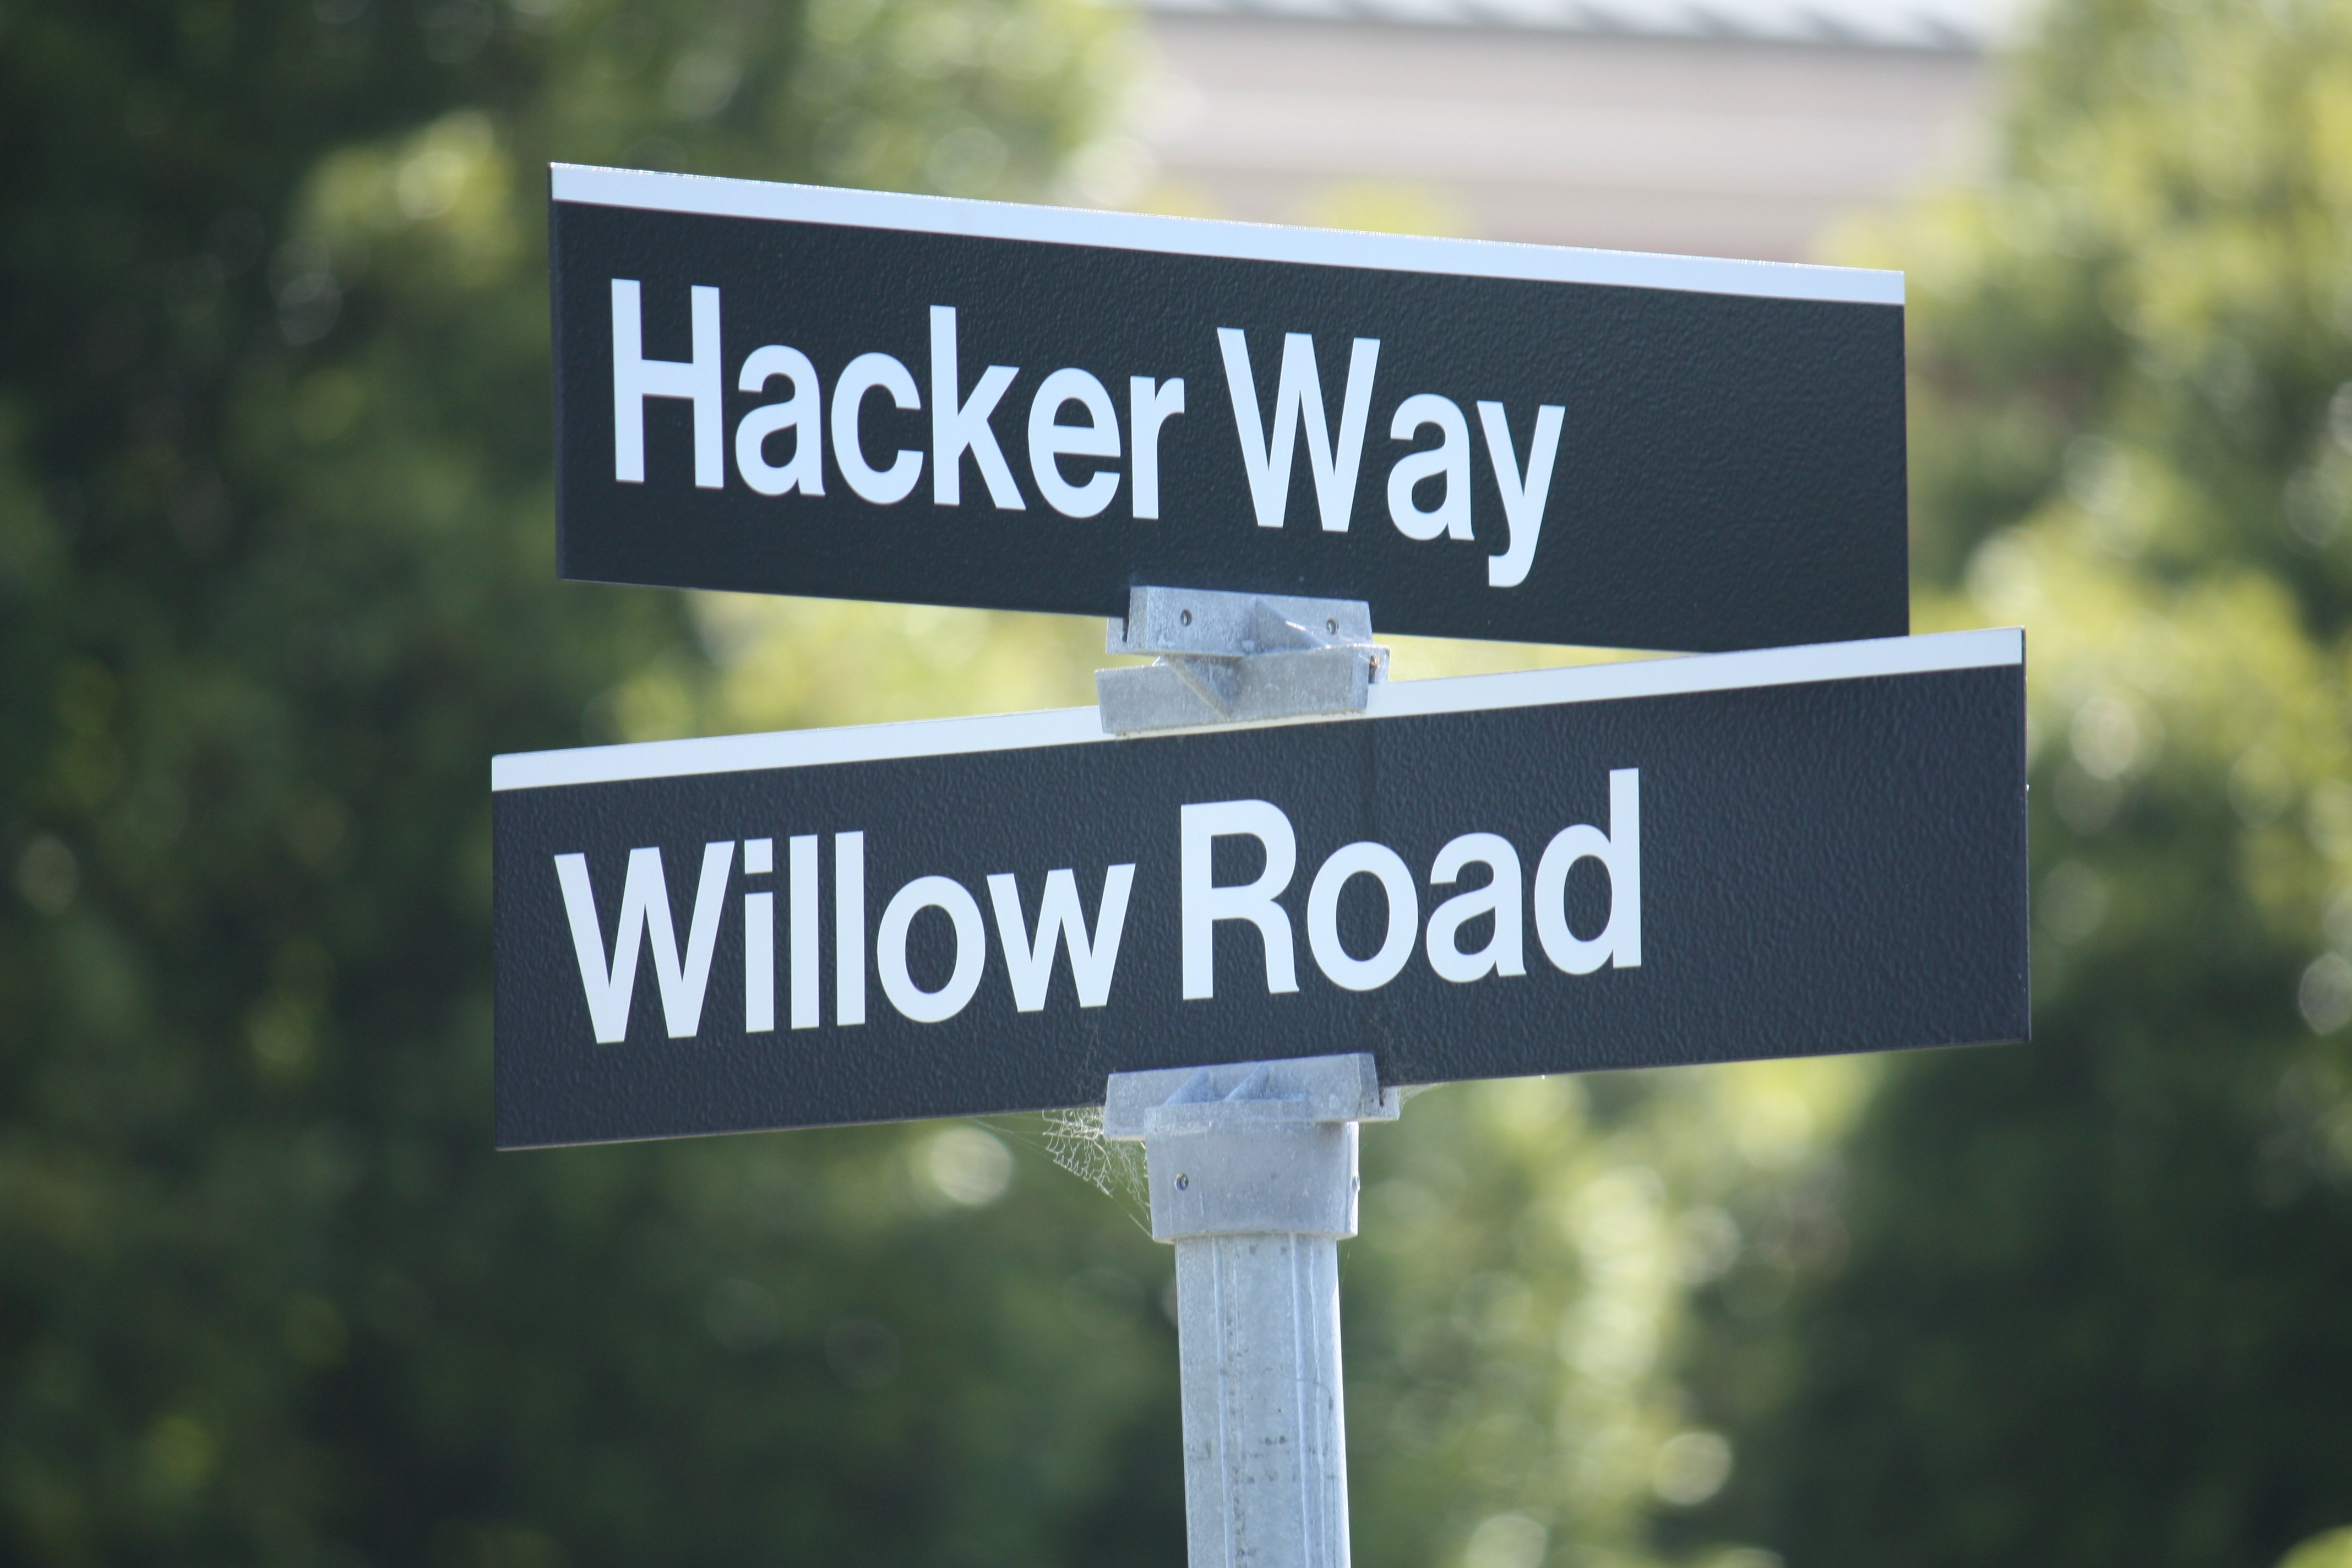 Hacker Way is the name of the Facebook's office street at the company's headquarters in Menlo Park, California.